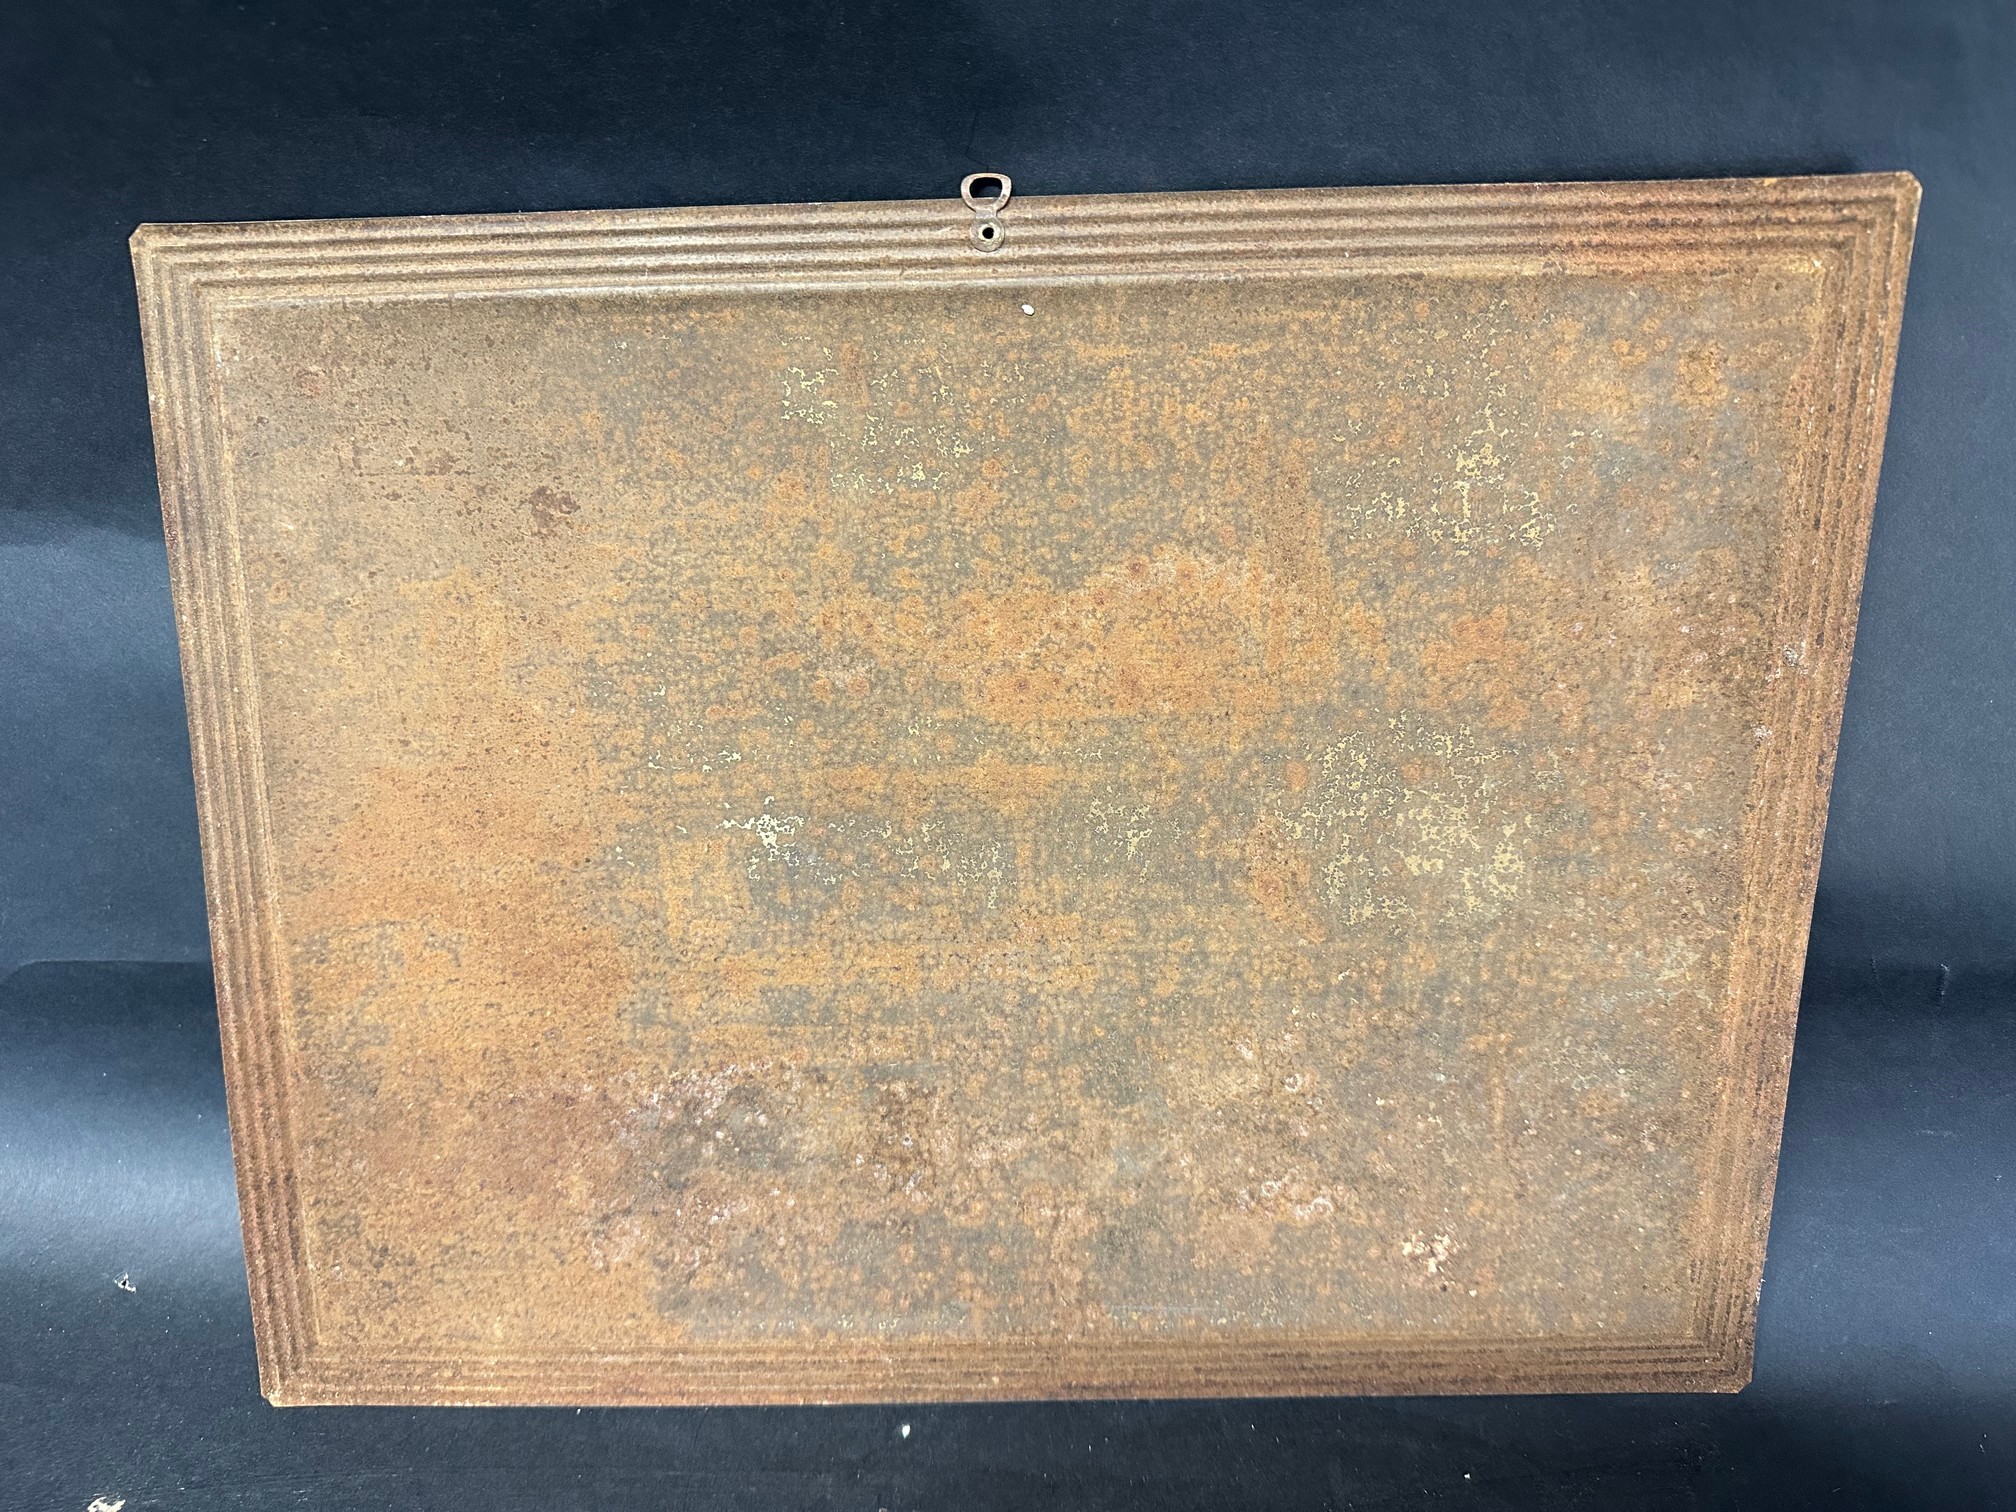 A Cork Distilleries Co. Ltd. Whisky tin advertising sign, in very good condition with hook intact, - Image 2 of 2